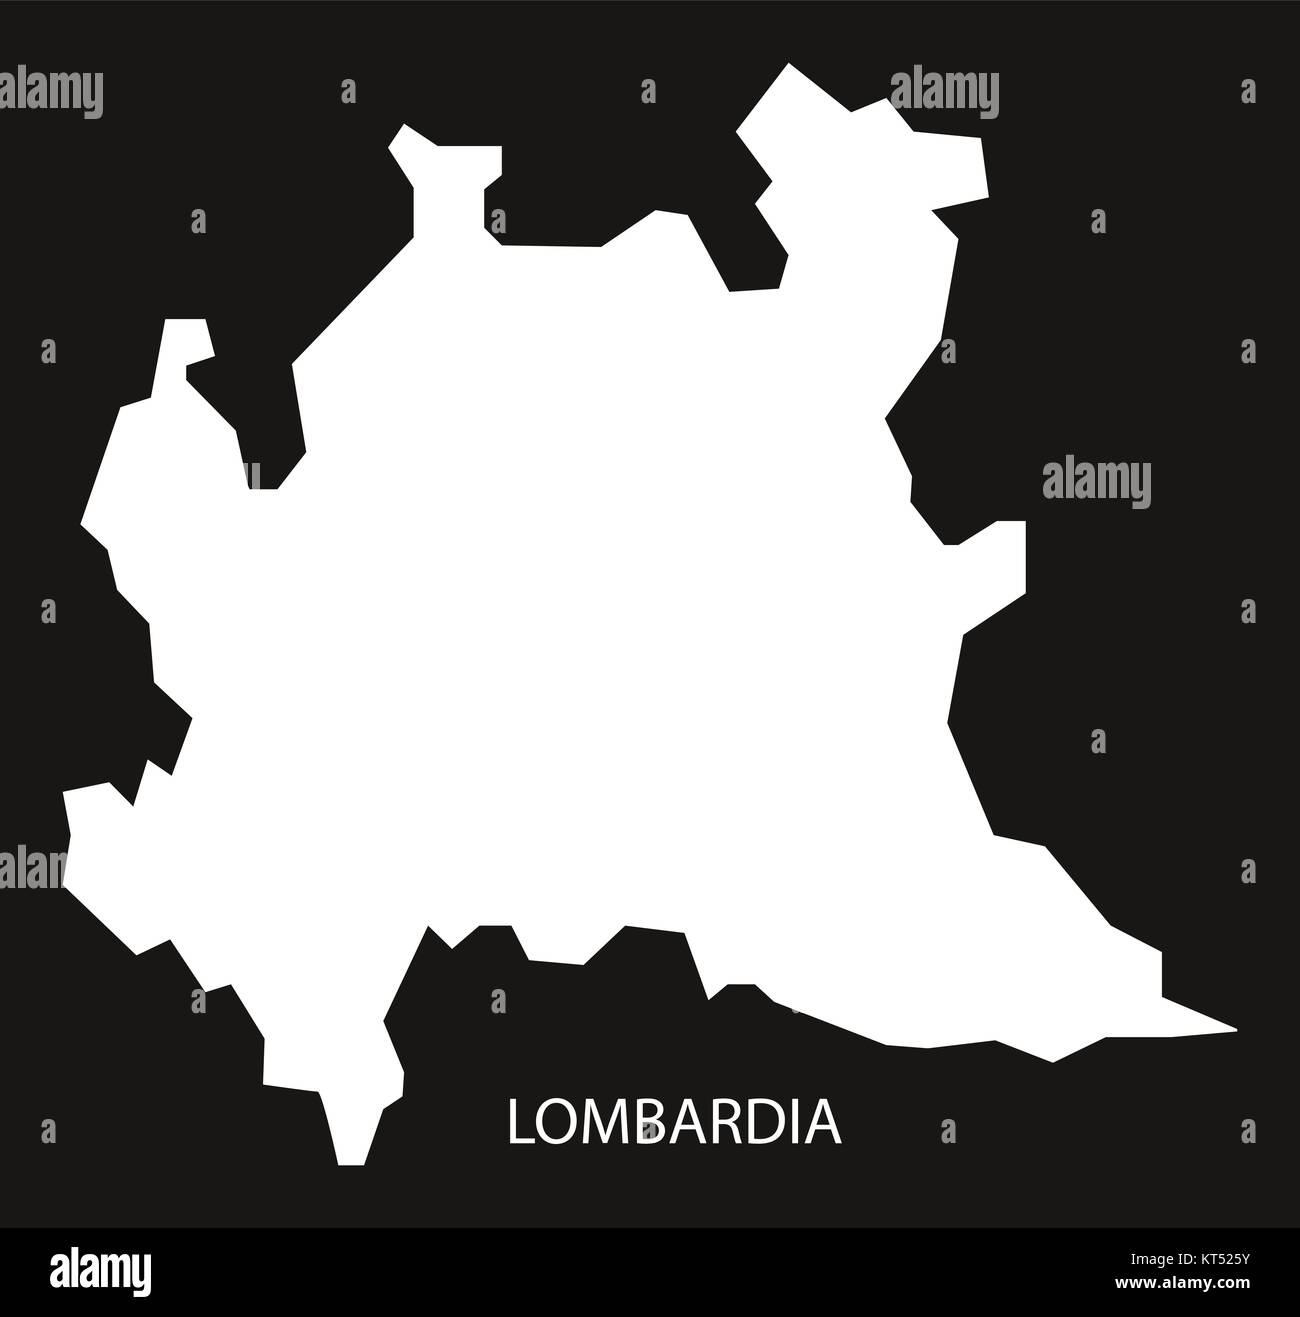 Lombardia Italy Map black inverted silhouette Stock Photo